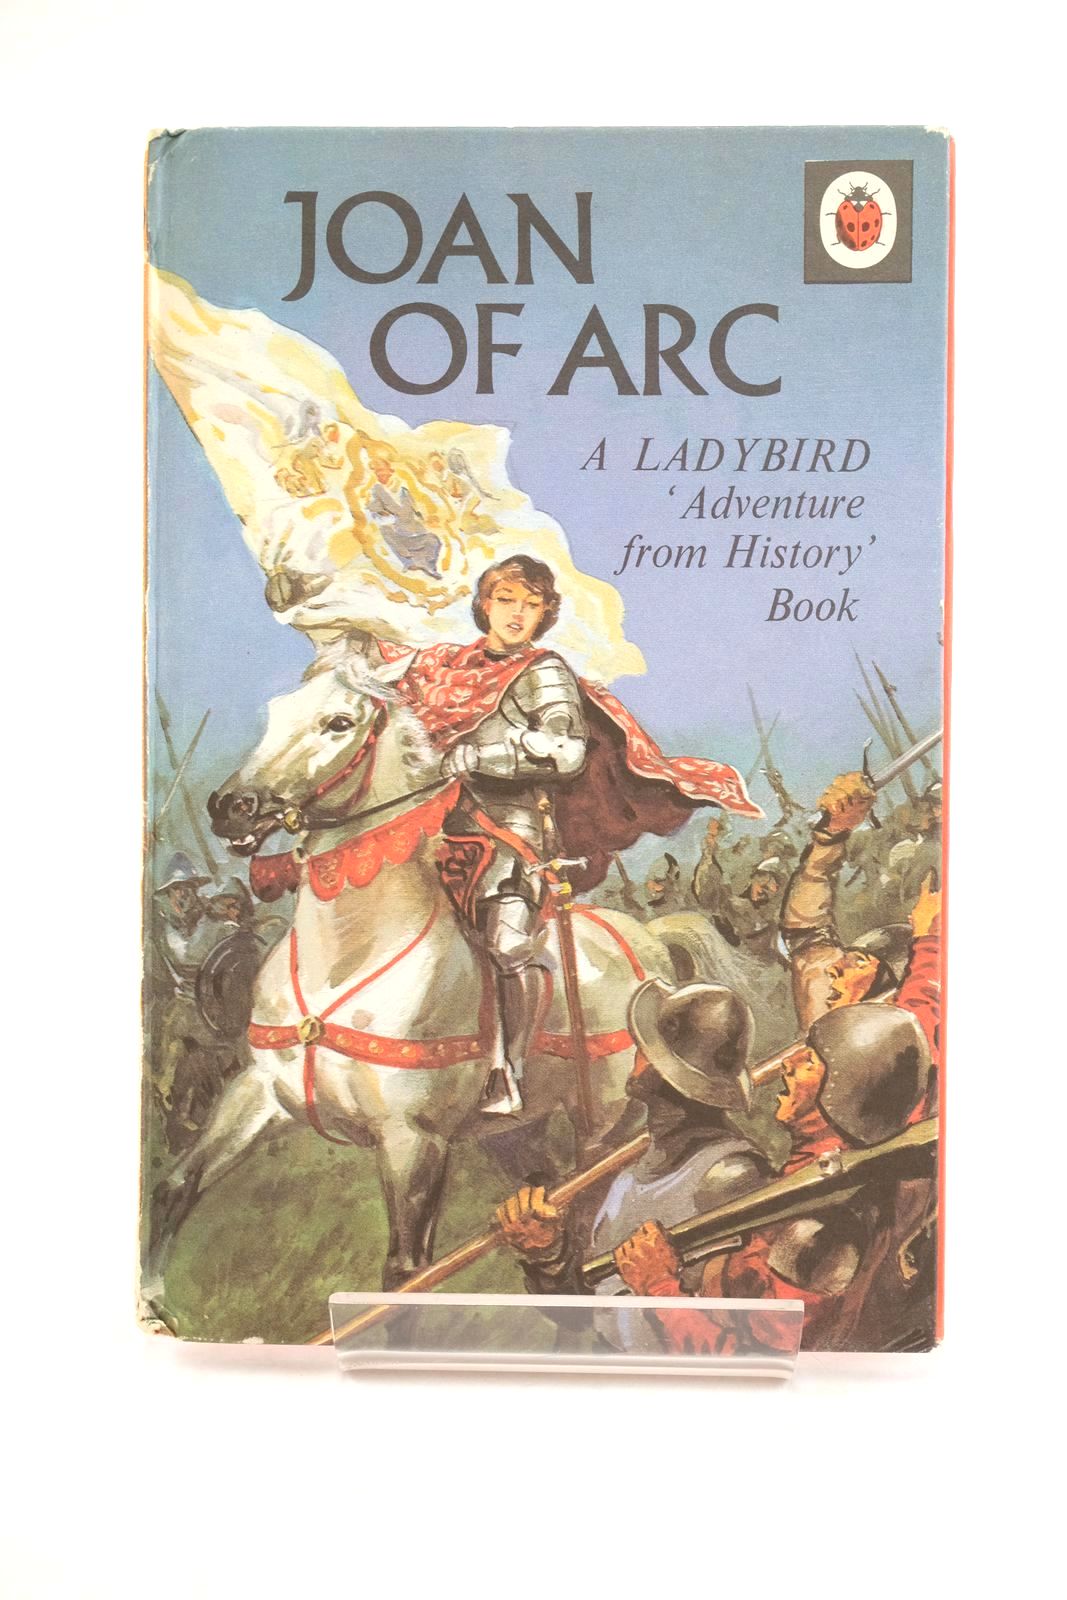 Photo of JOAN OF ARC written by Peach, L. Du Garde illustrated by Kenney, John published by Wills &amp; Hepworth Ltd. (STOCK CODE: 1324410)  for sale by Stella & Rose's Books